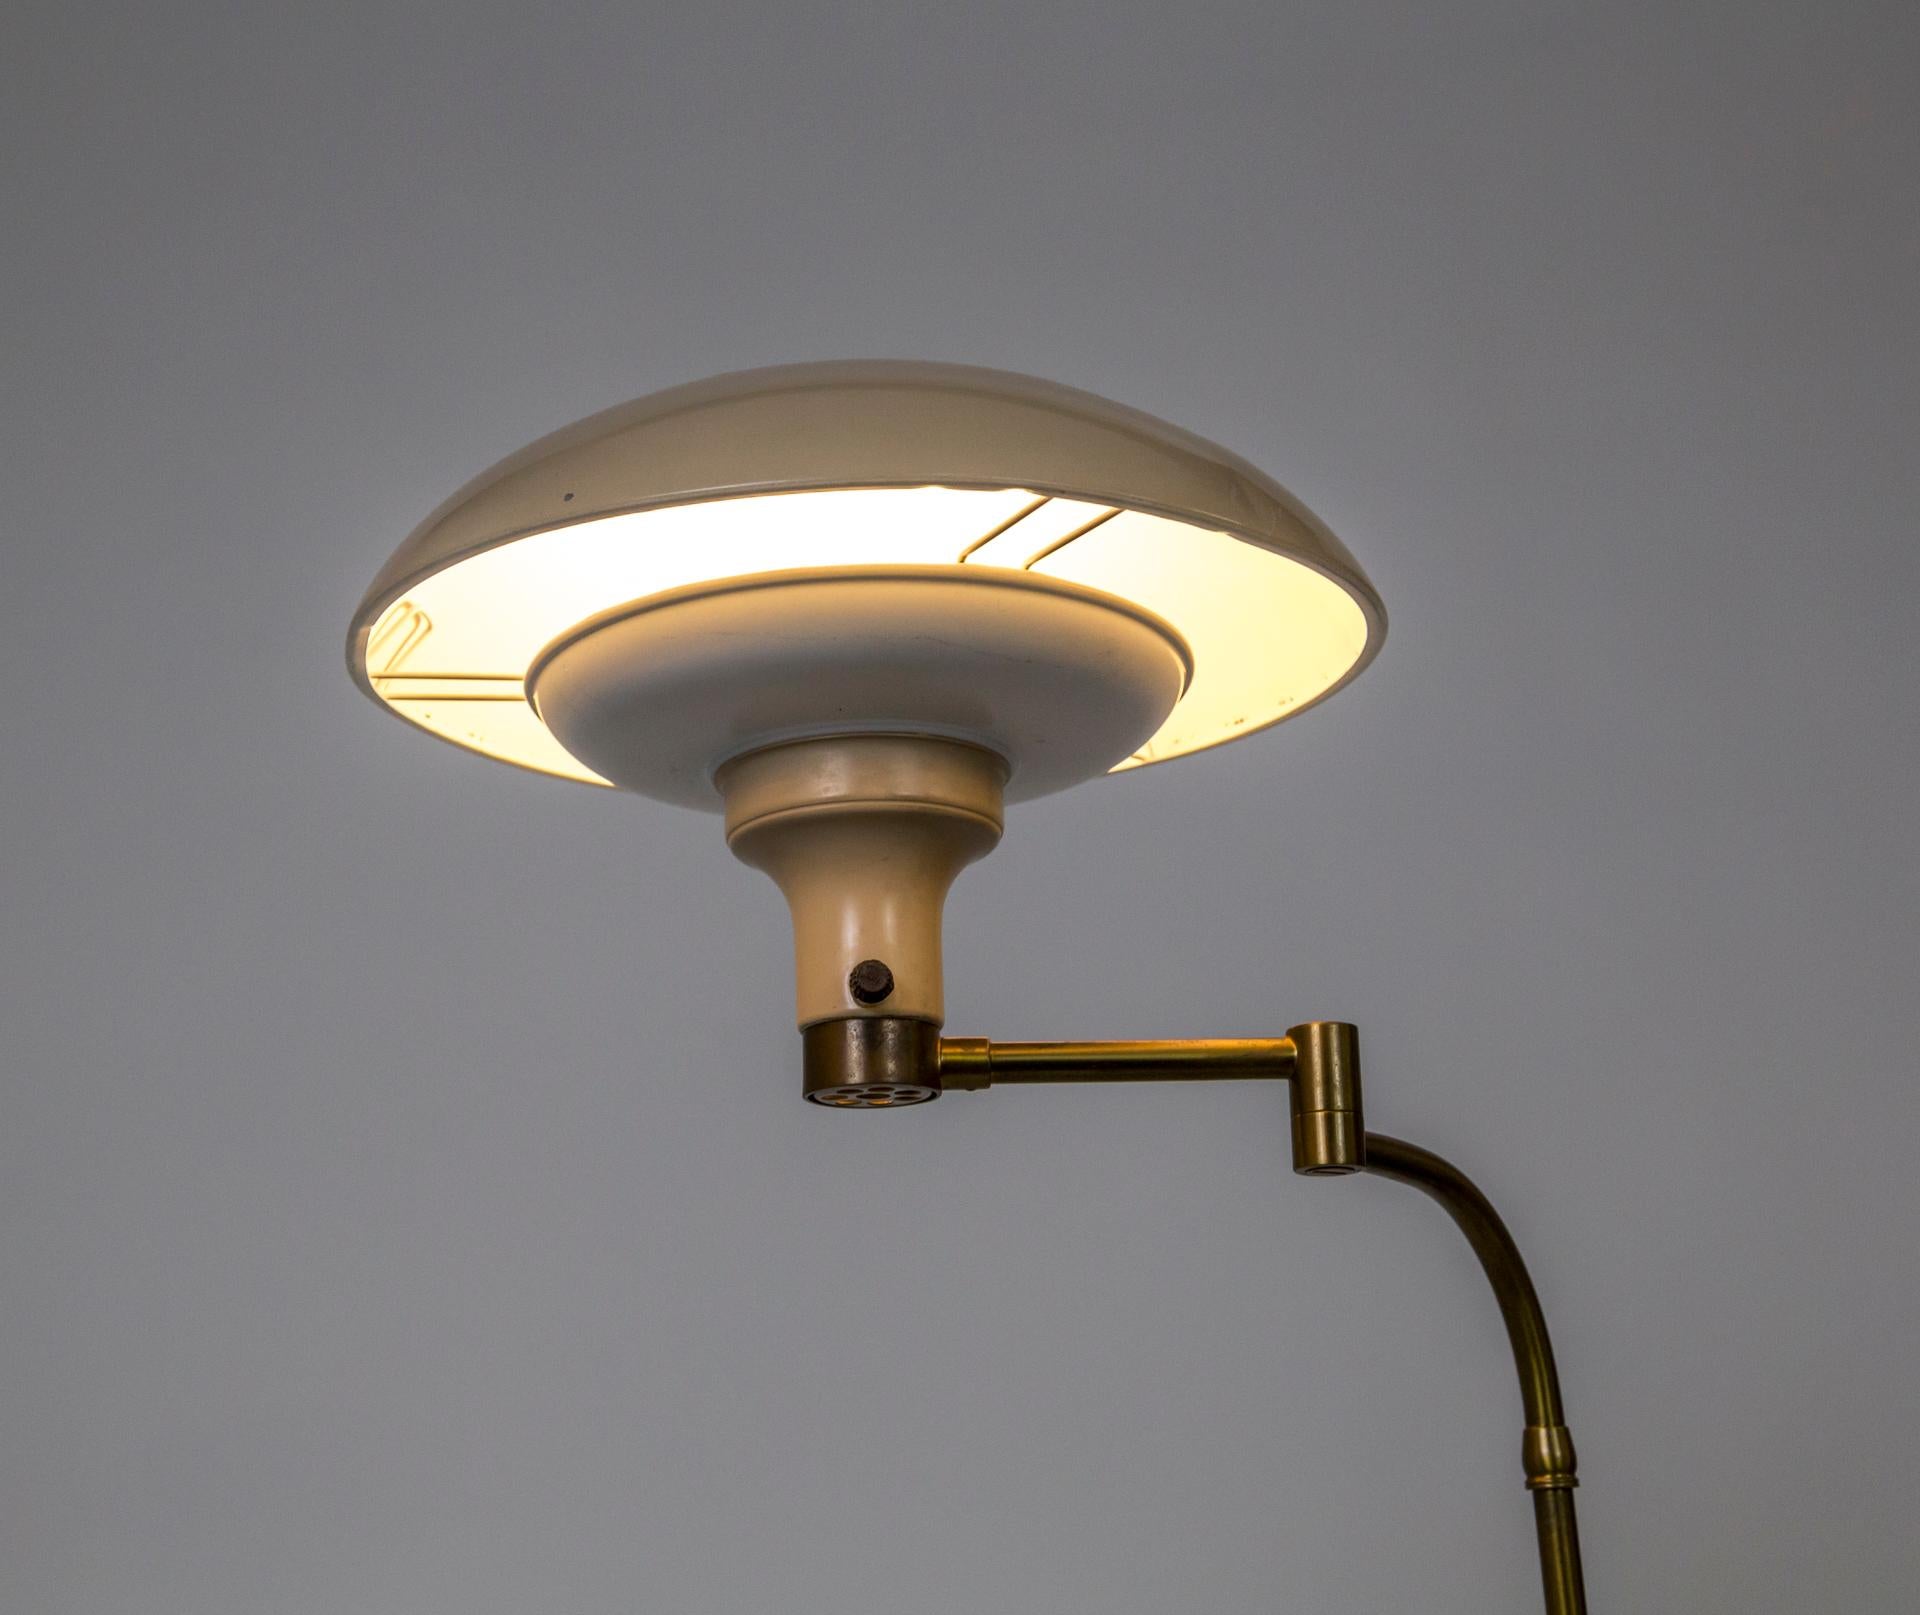 Dazor 1950s Flying Saucer Floor Lamp in Brass & Buff Lacquer 2